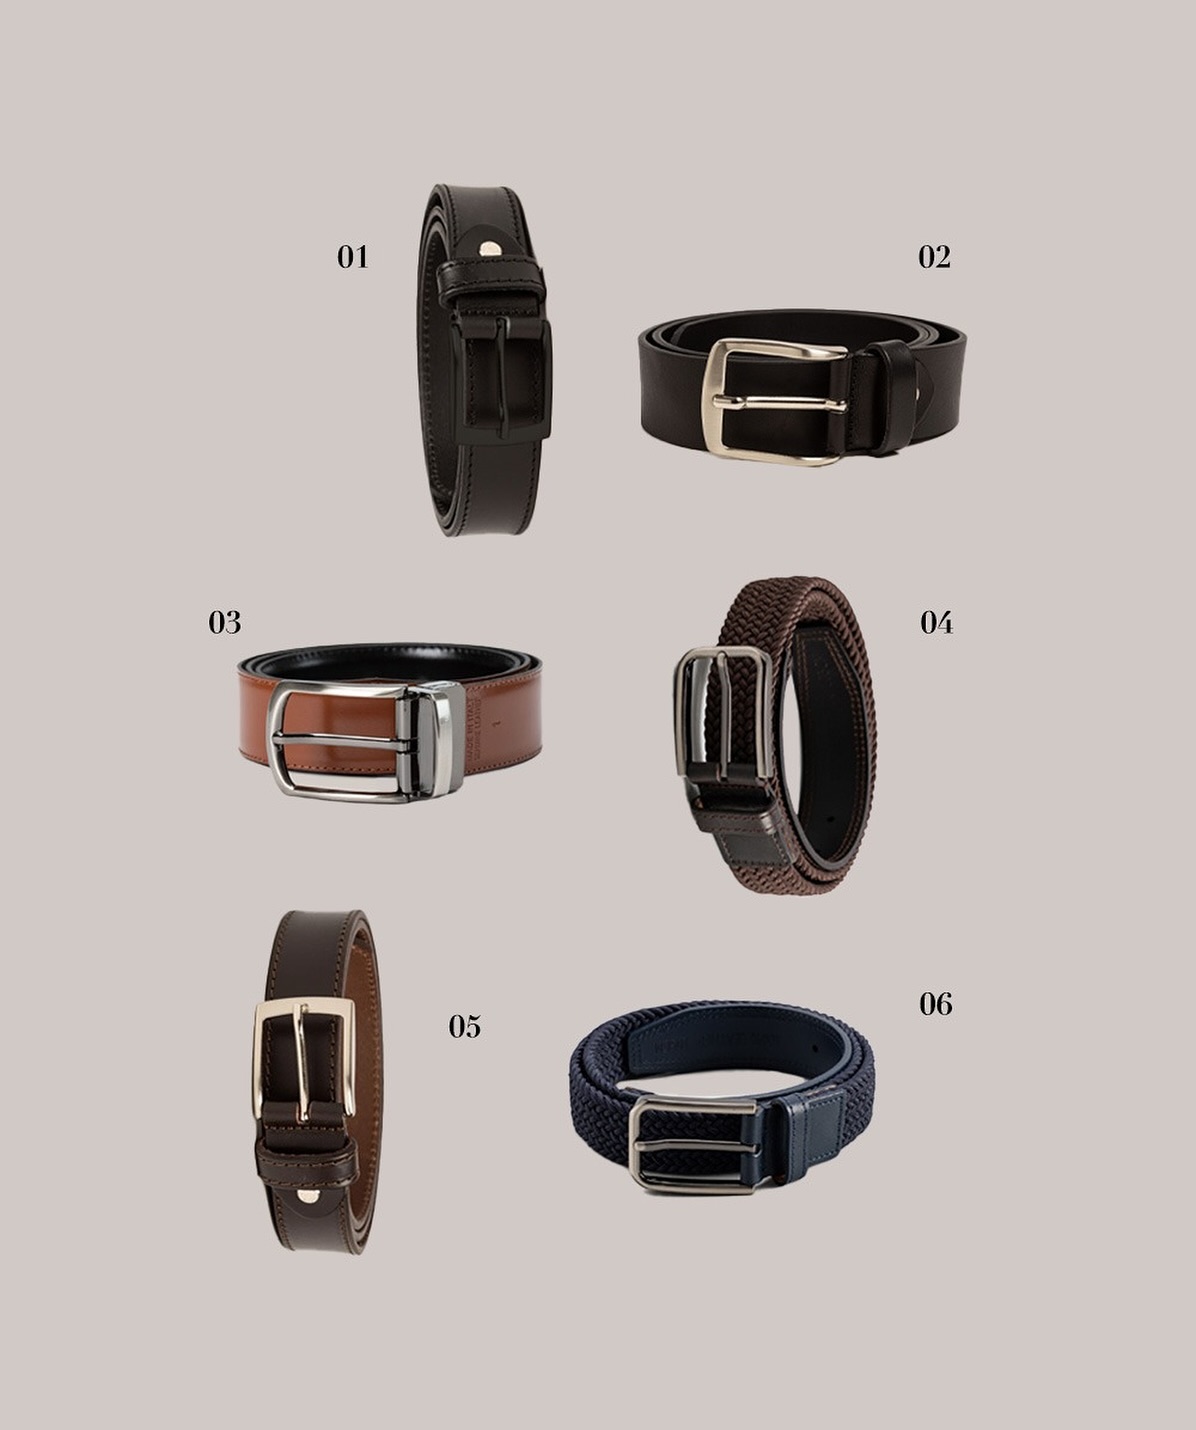 5 belts for the event season
#musthave